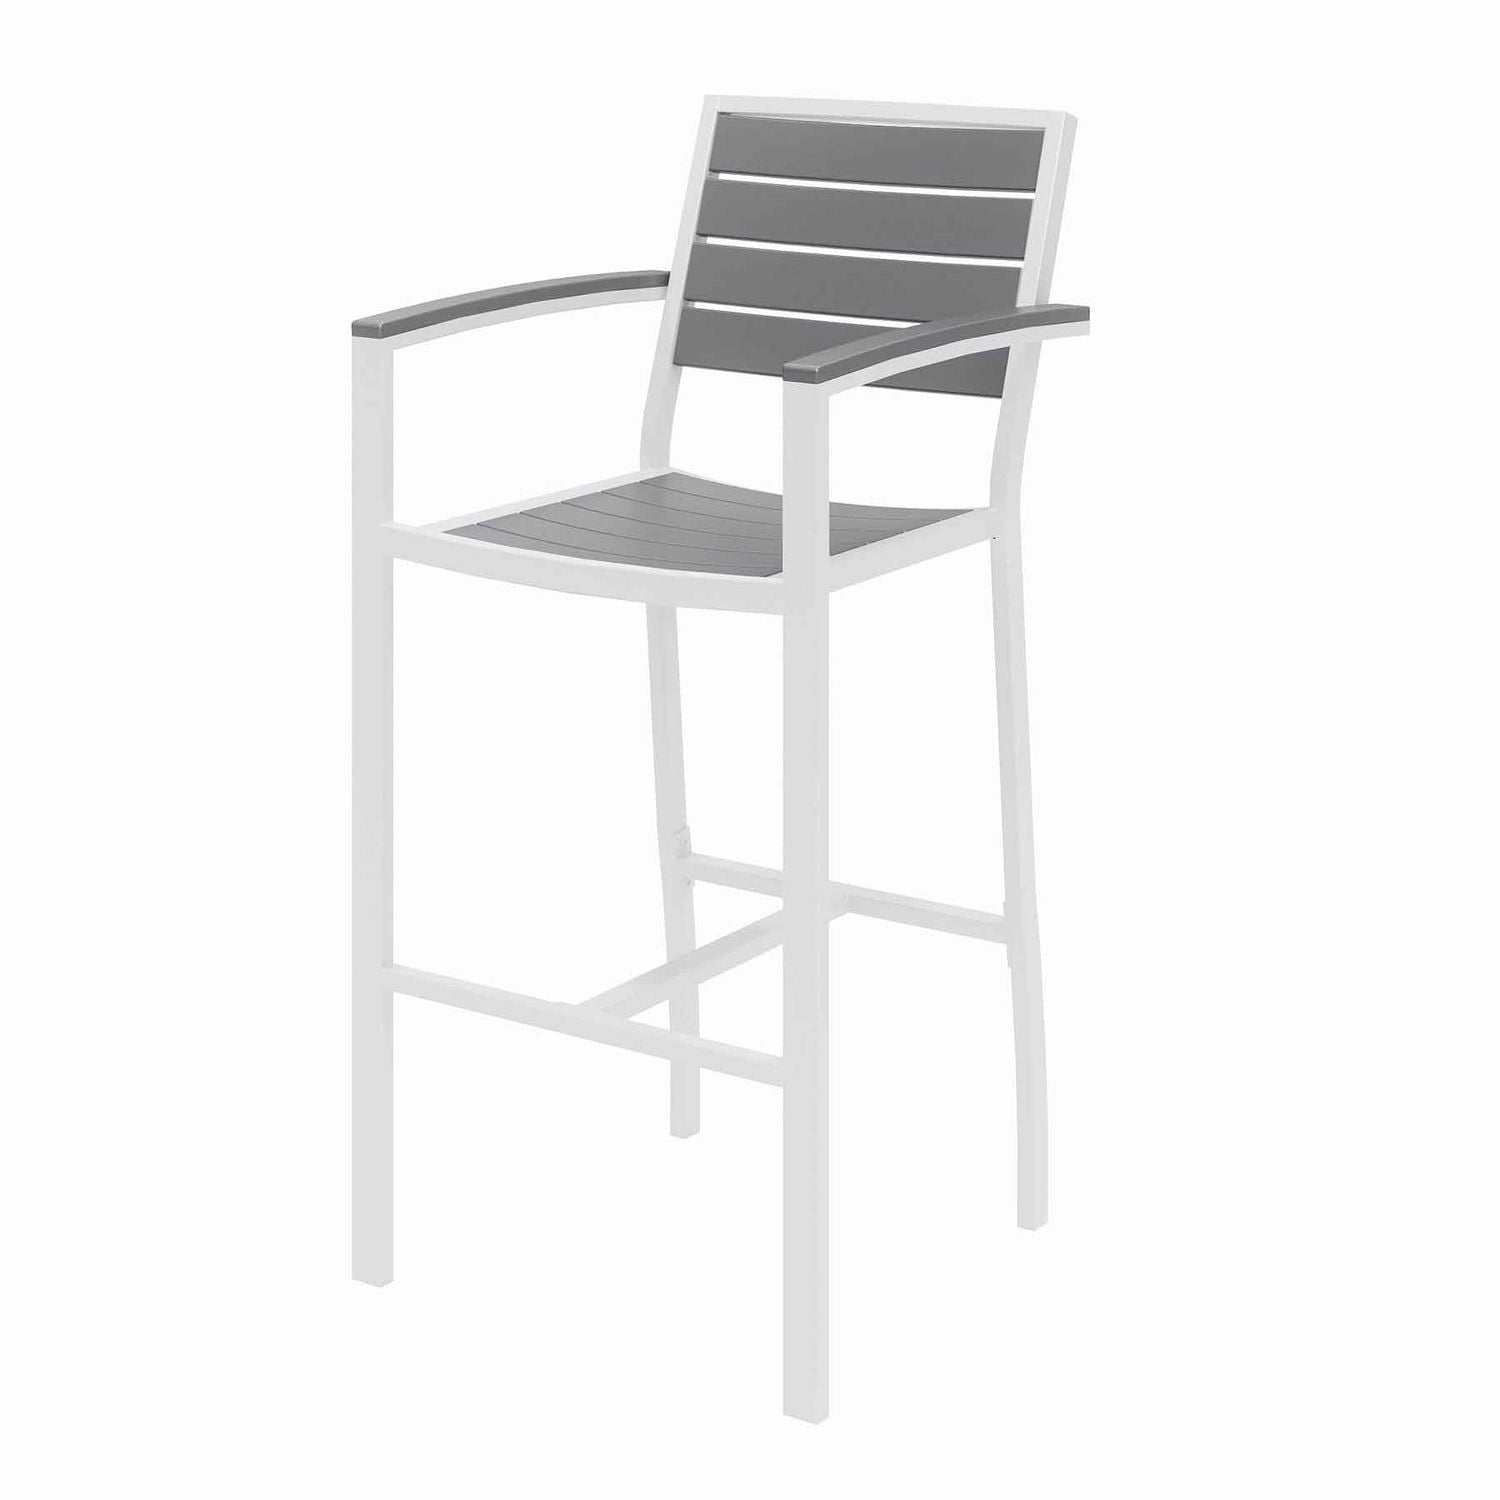 eveleen-outdoor-bistro-patio-table-2-gray-powder-coated-polymer-barstools-round-30-dia-x-41h-whiteships-in-4-6-bus-days_kfi840031918475 - 3